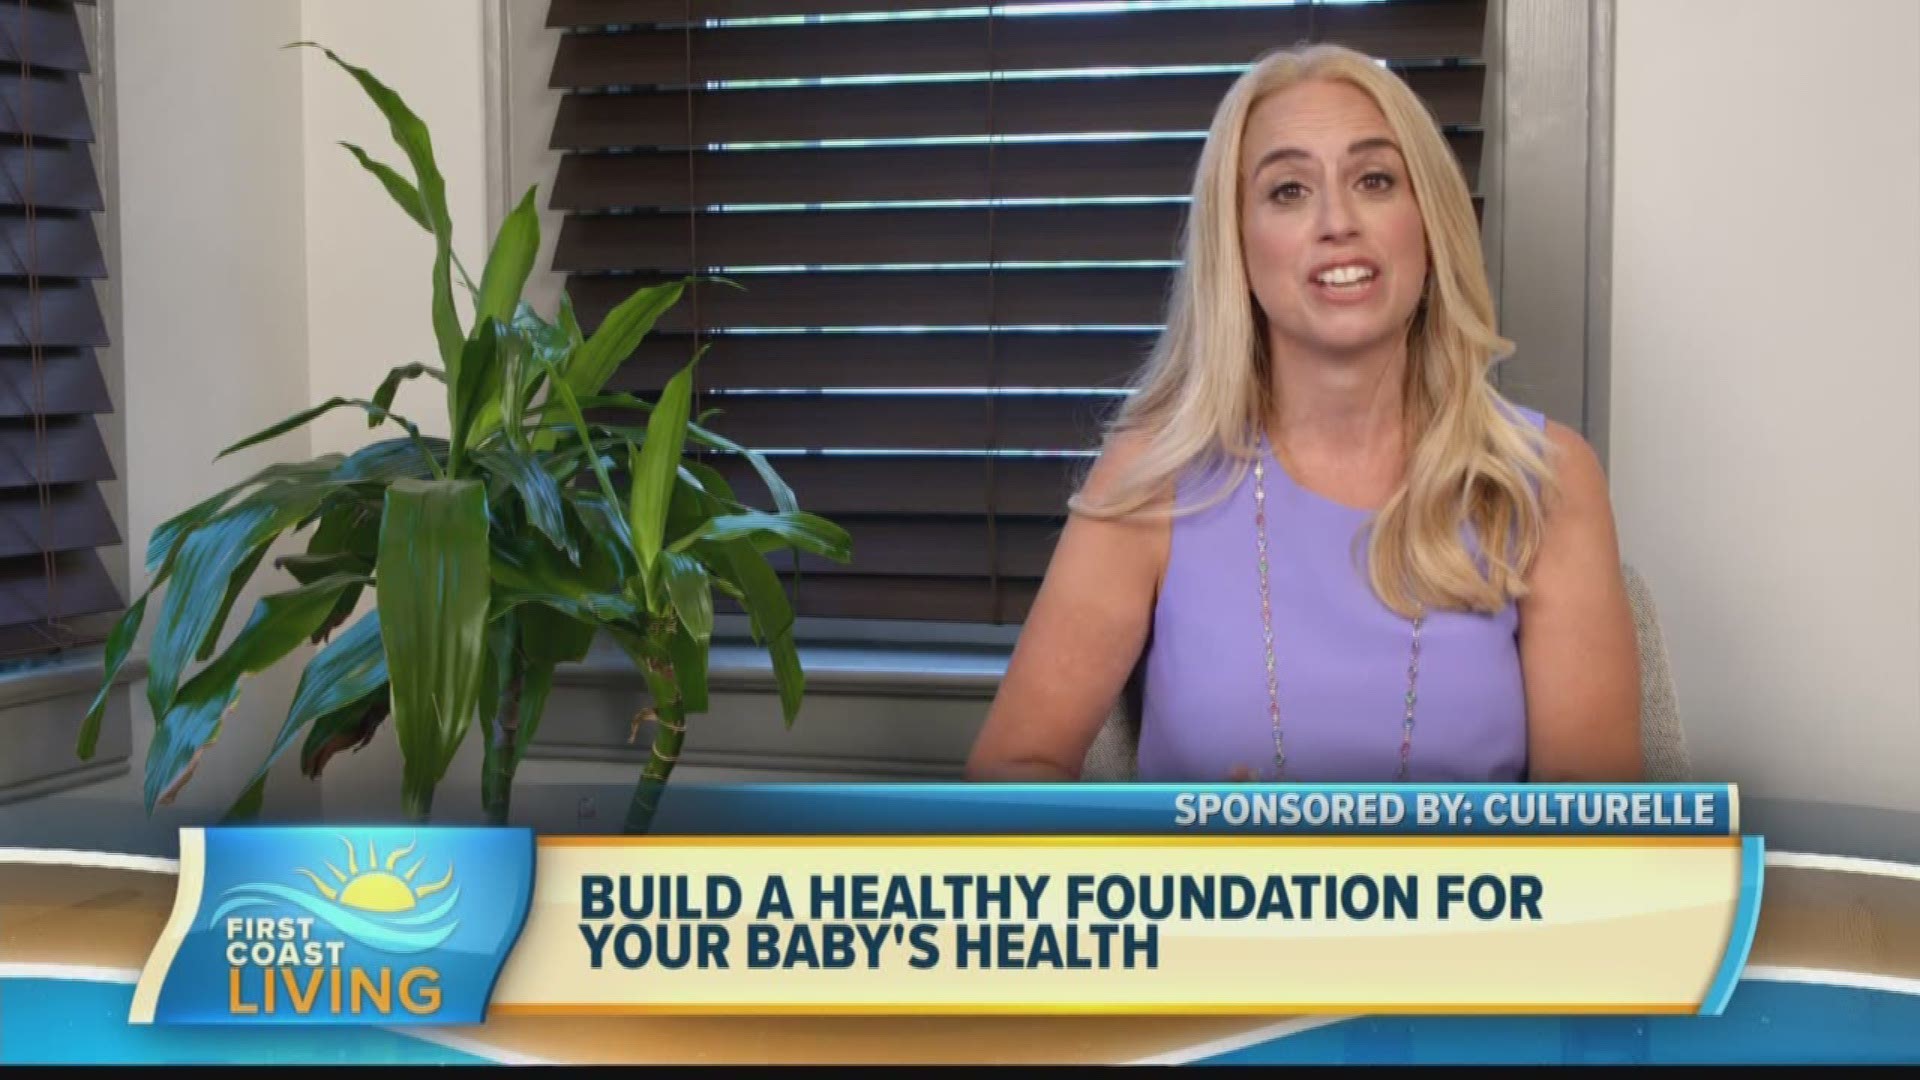 How to create a healthy foundation for your baby's health from the very beginning.